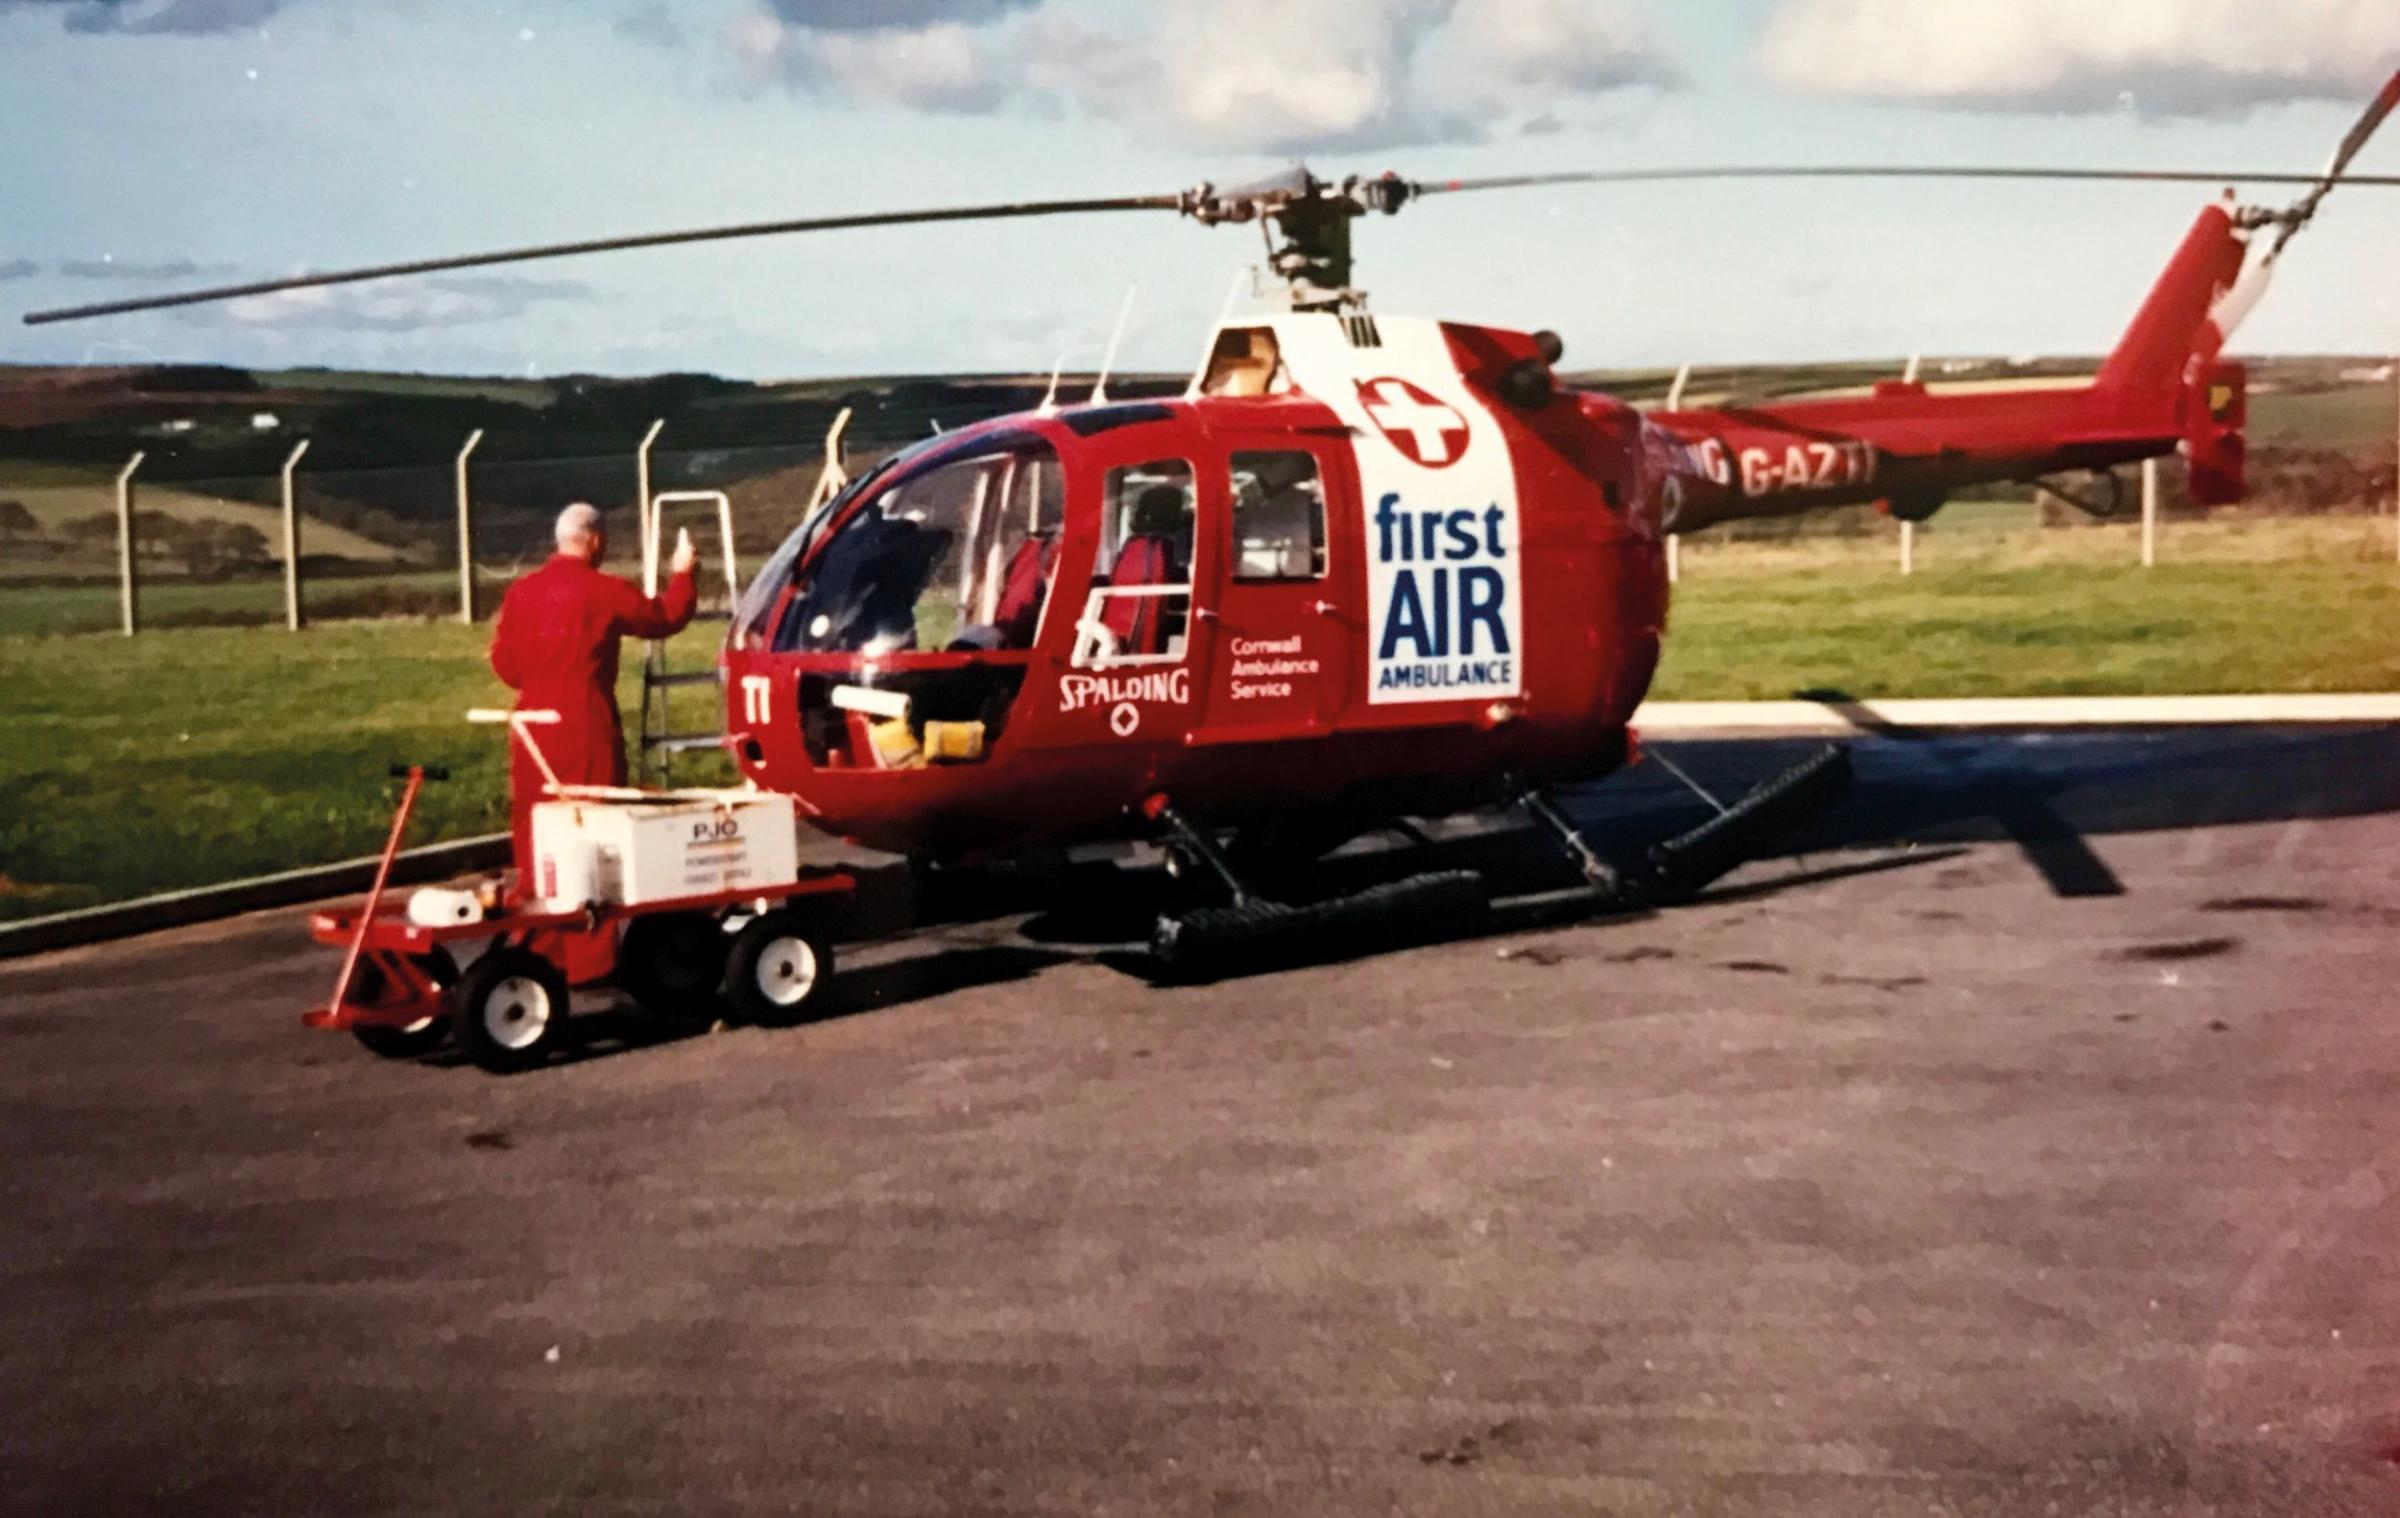 The very first air ambulance